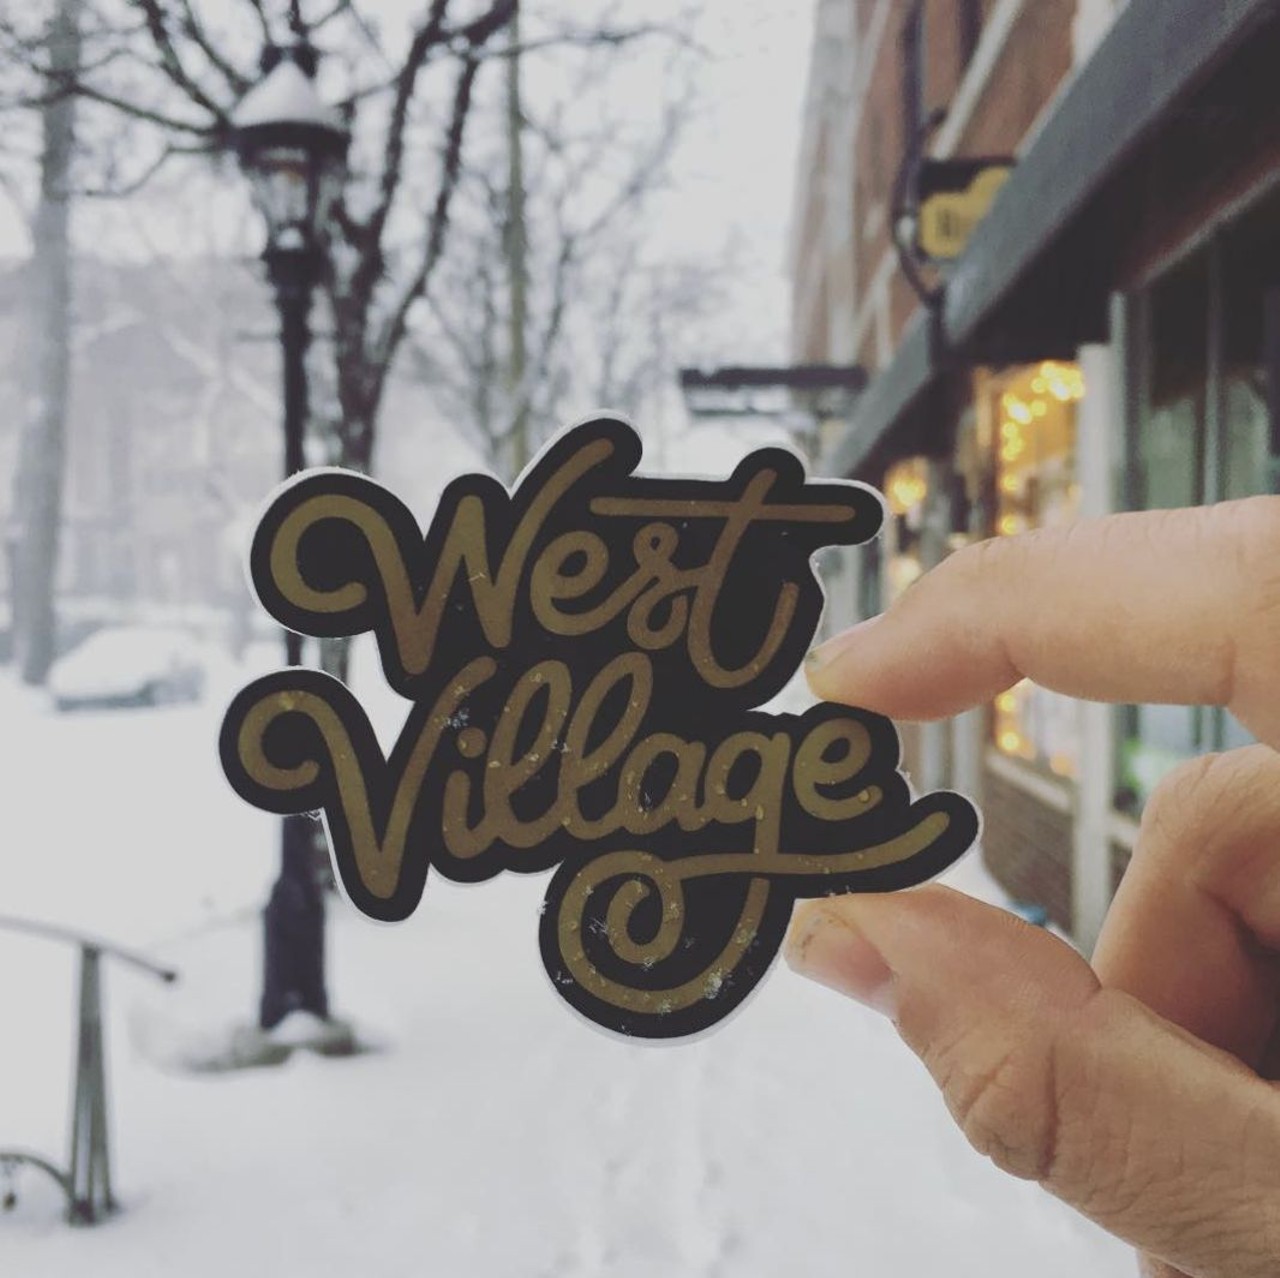 A tour of West Village
Detroit, MI 48214
This adorable Detroit neighborhood is full of cute restaurants, homes, and boutique businesses that you&#146;ll just gush over.
Photo courtesy of @ctdetroit